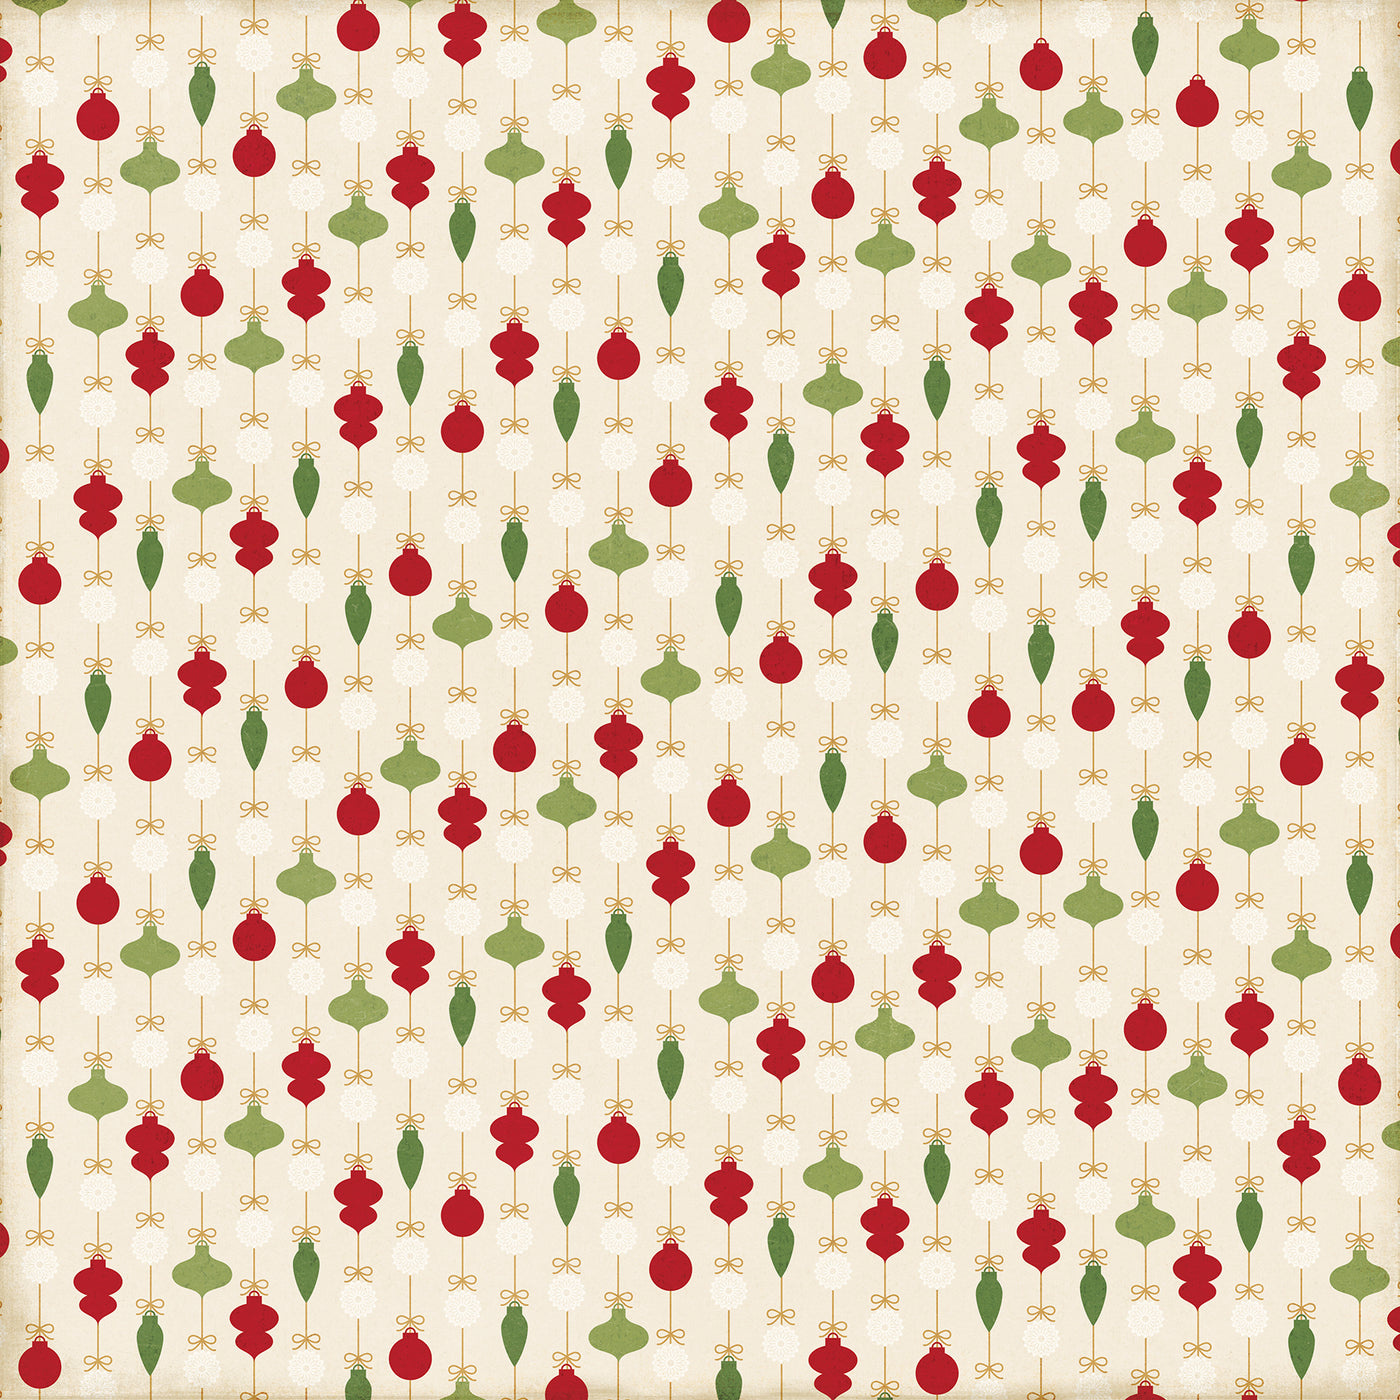 B - red and green ornaments on an off-white background